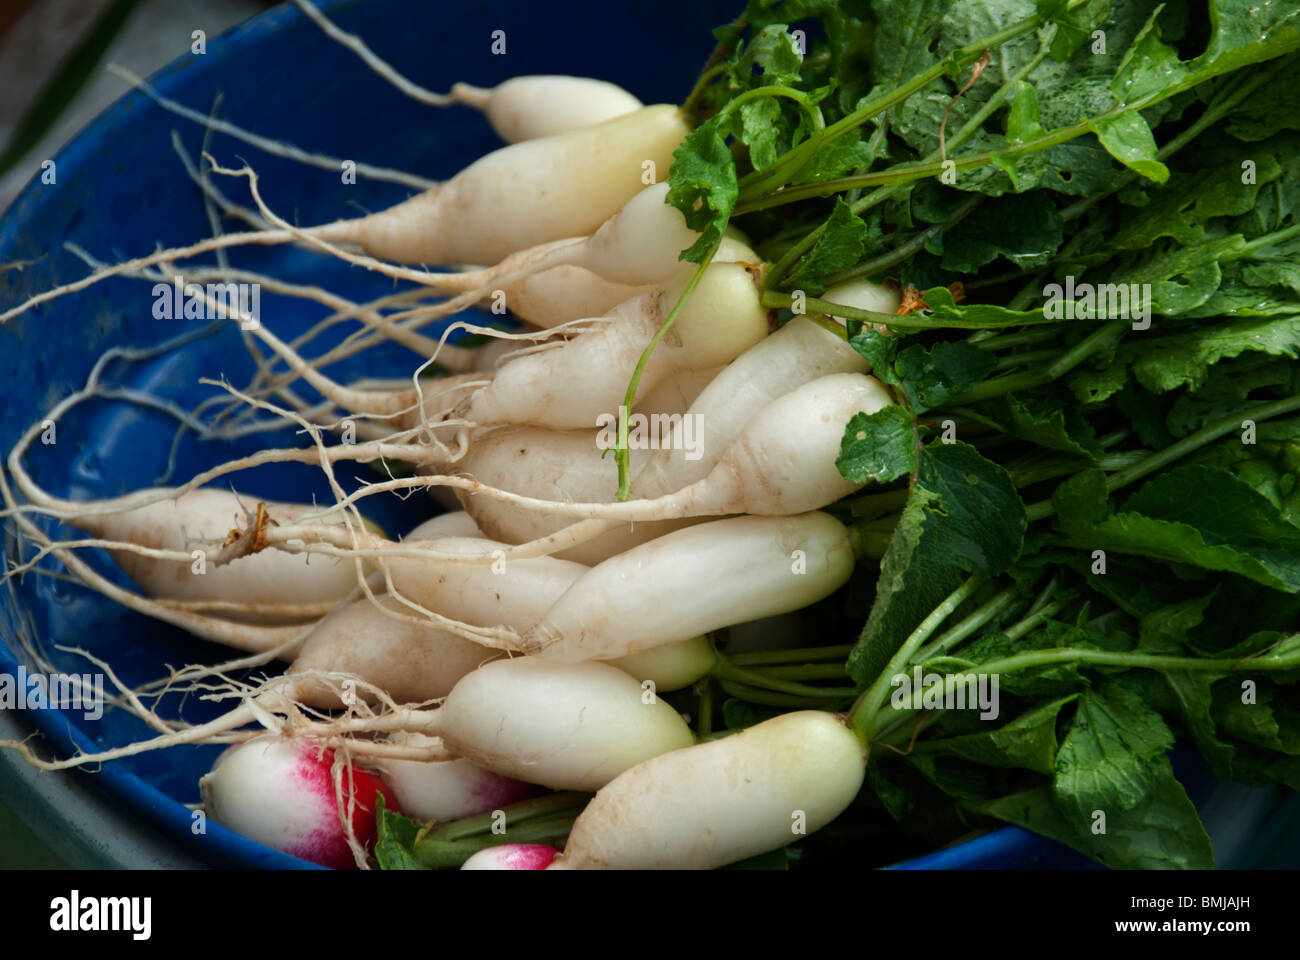 Freshly harvested baby daikon radishes to be eaten as a raw vegetable, Japan Stock Photo